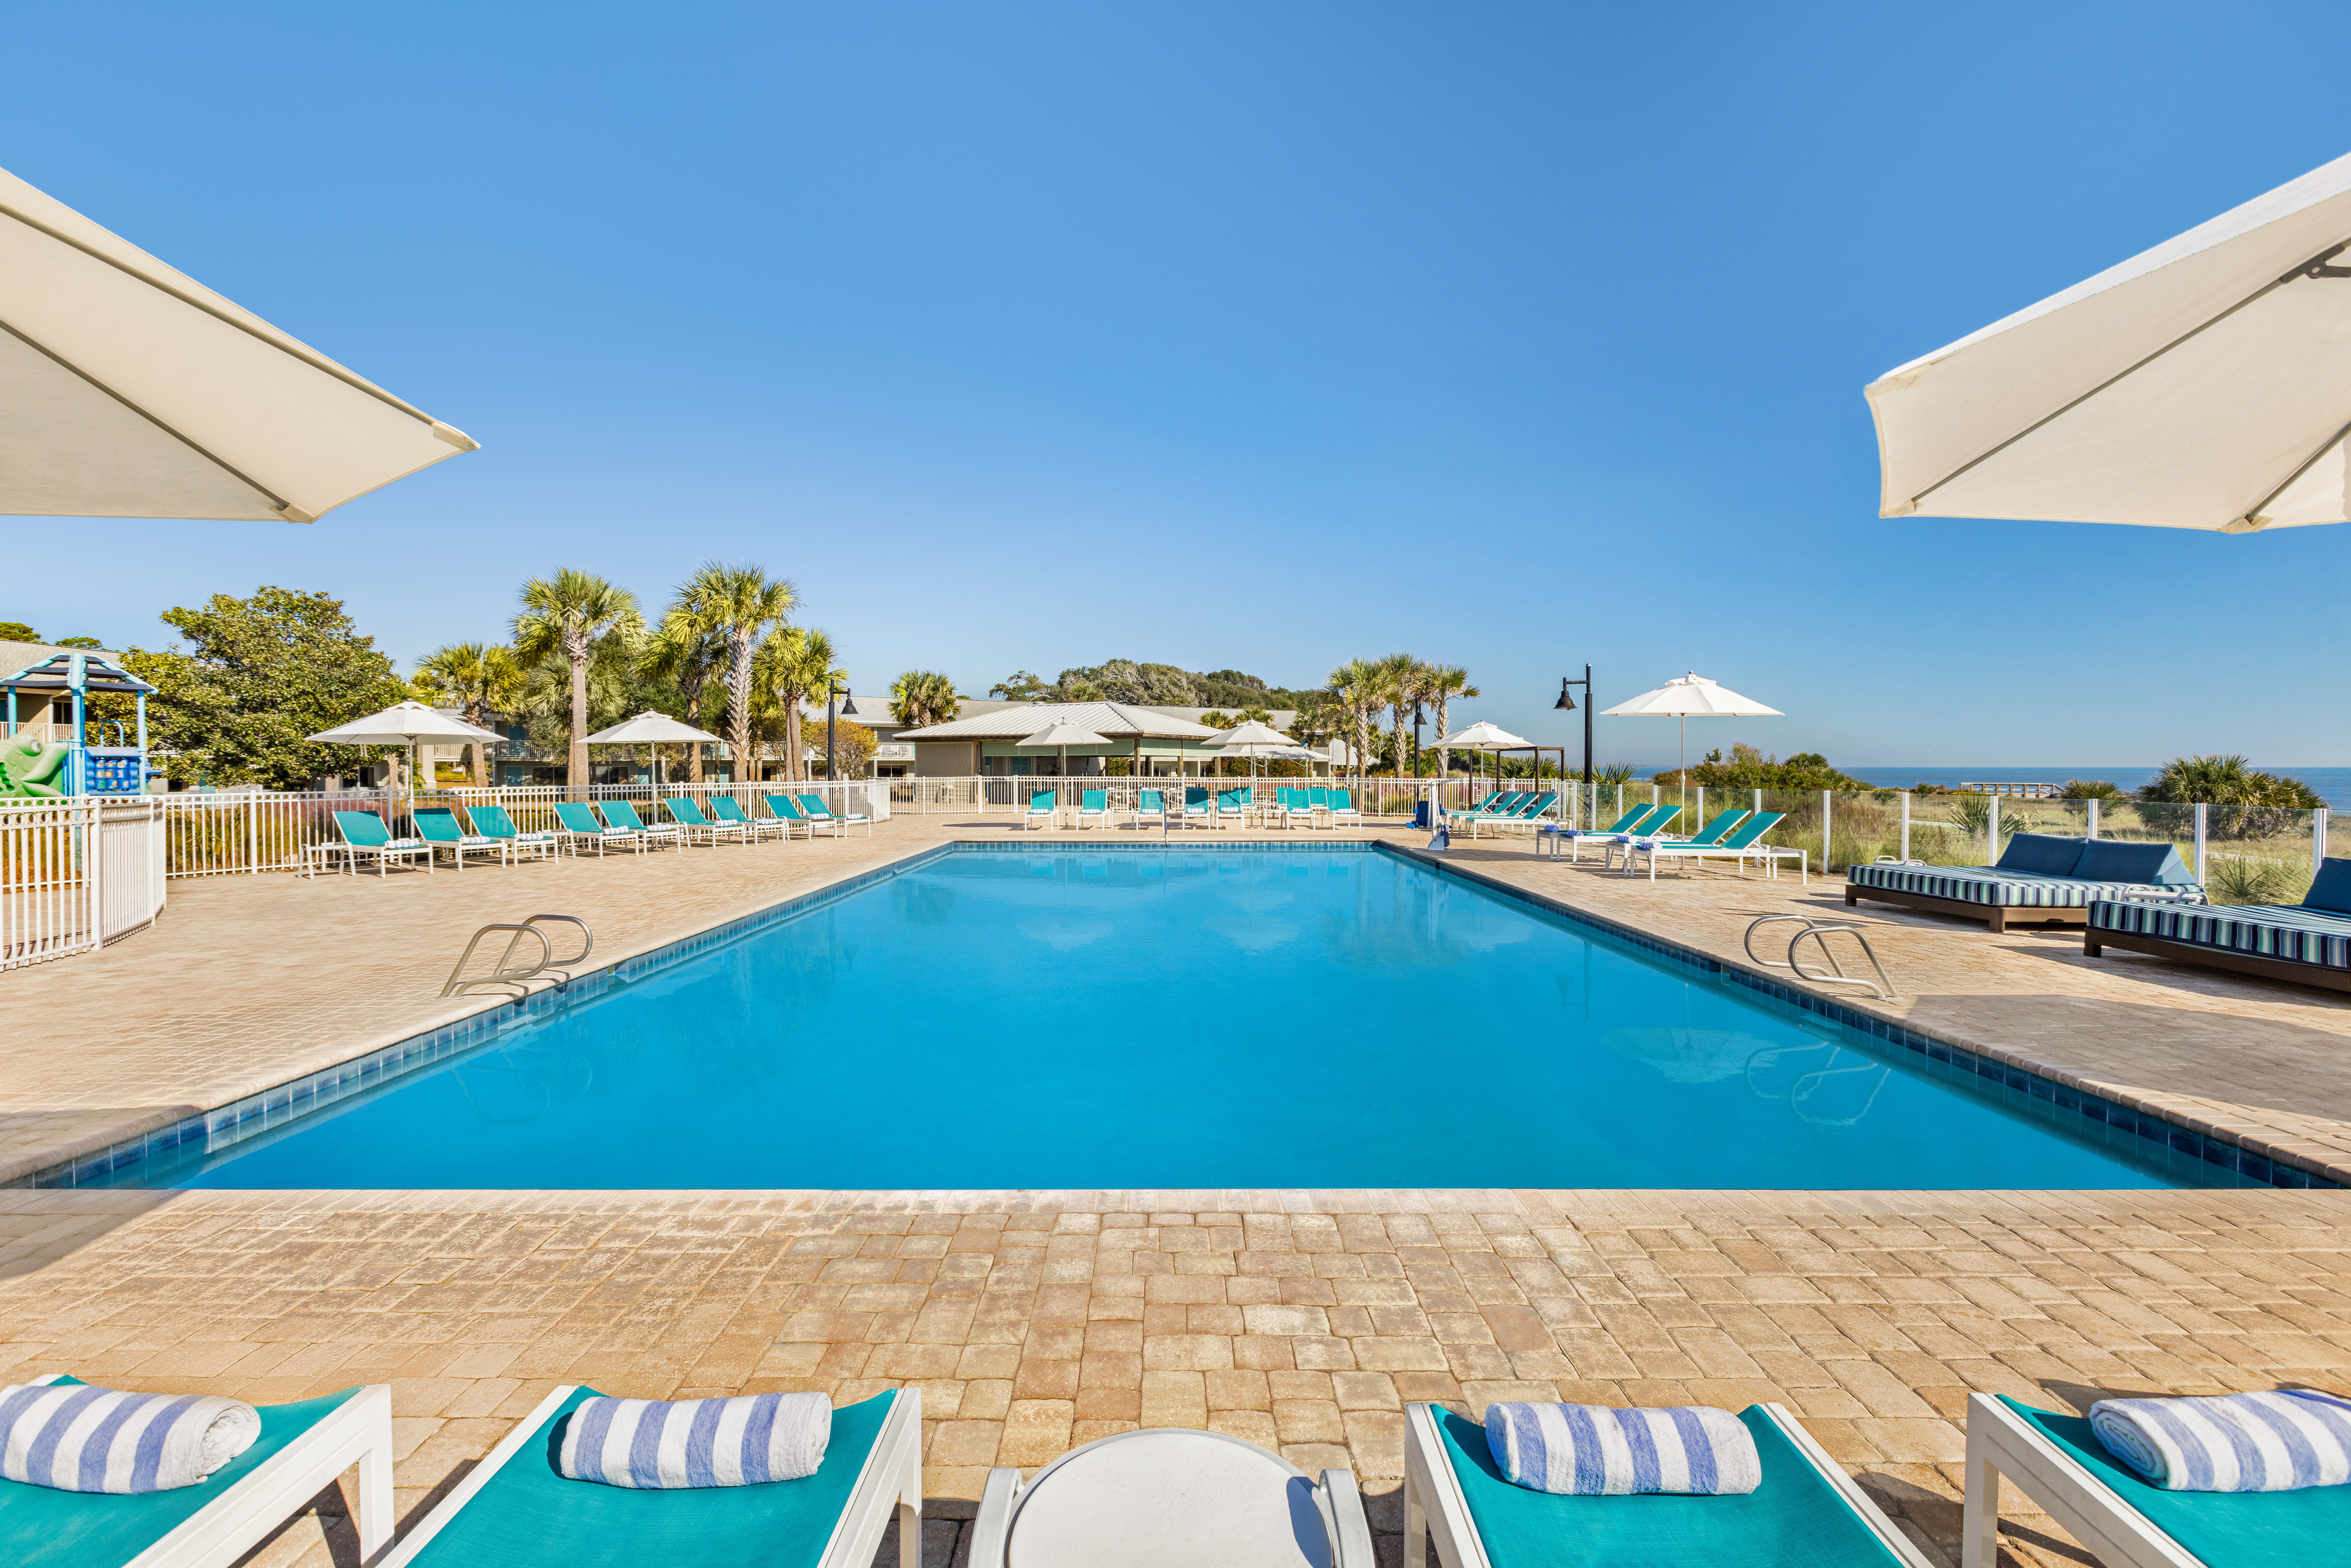 Take a dip in pool while taking in the picturesque ocean views